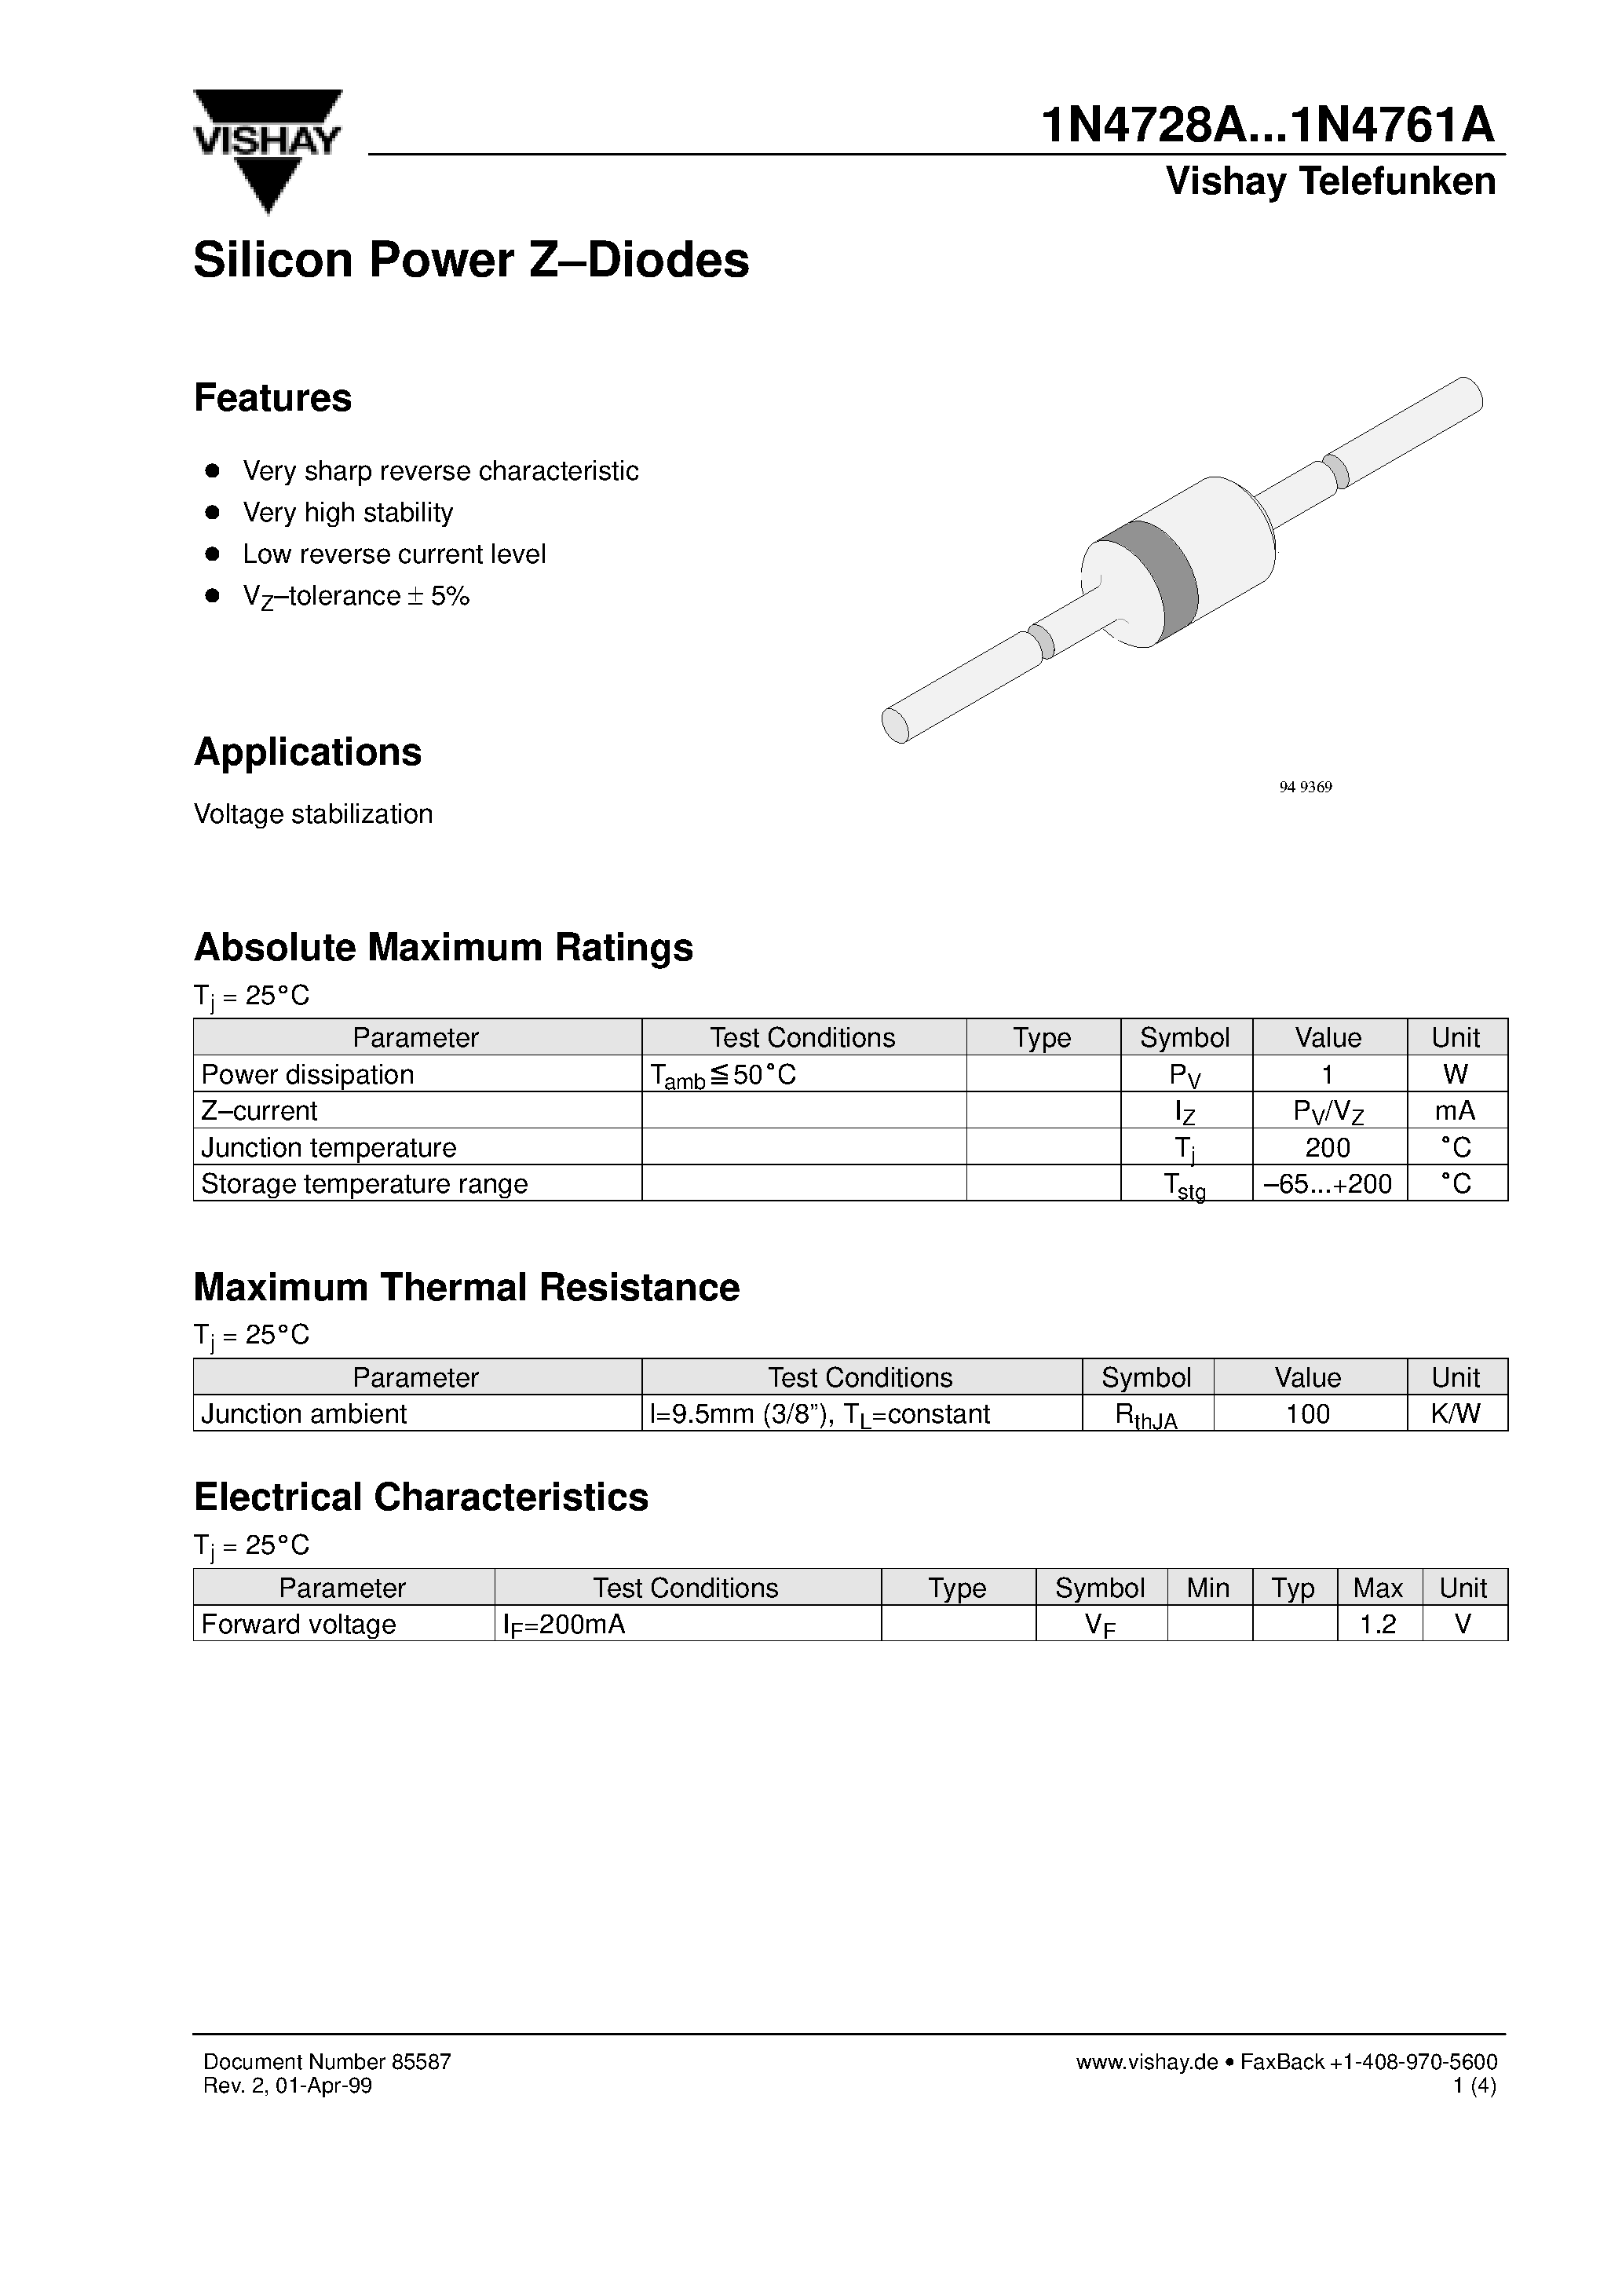 Даташит 1N4742A - Silicon Power Z-Diodes страница 1